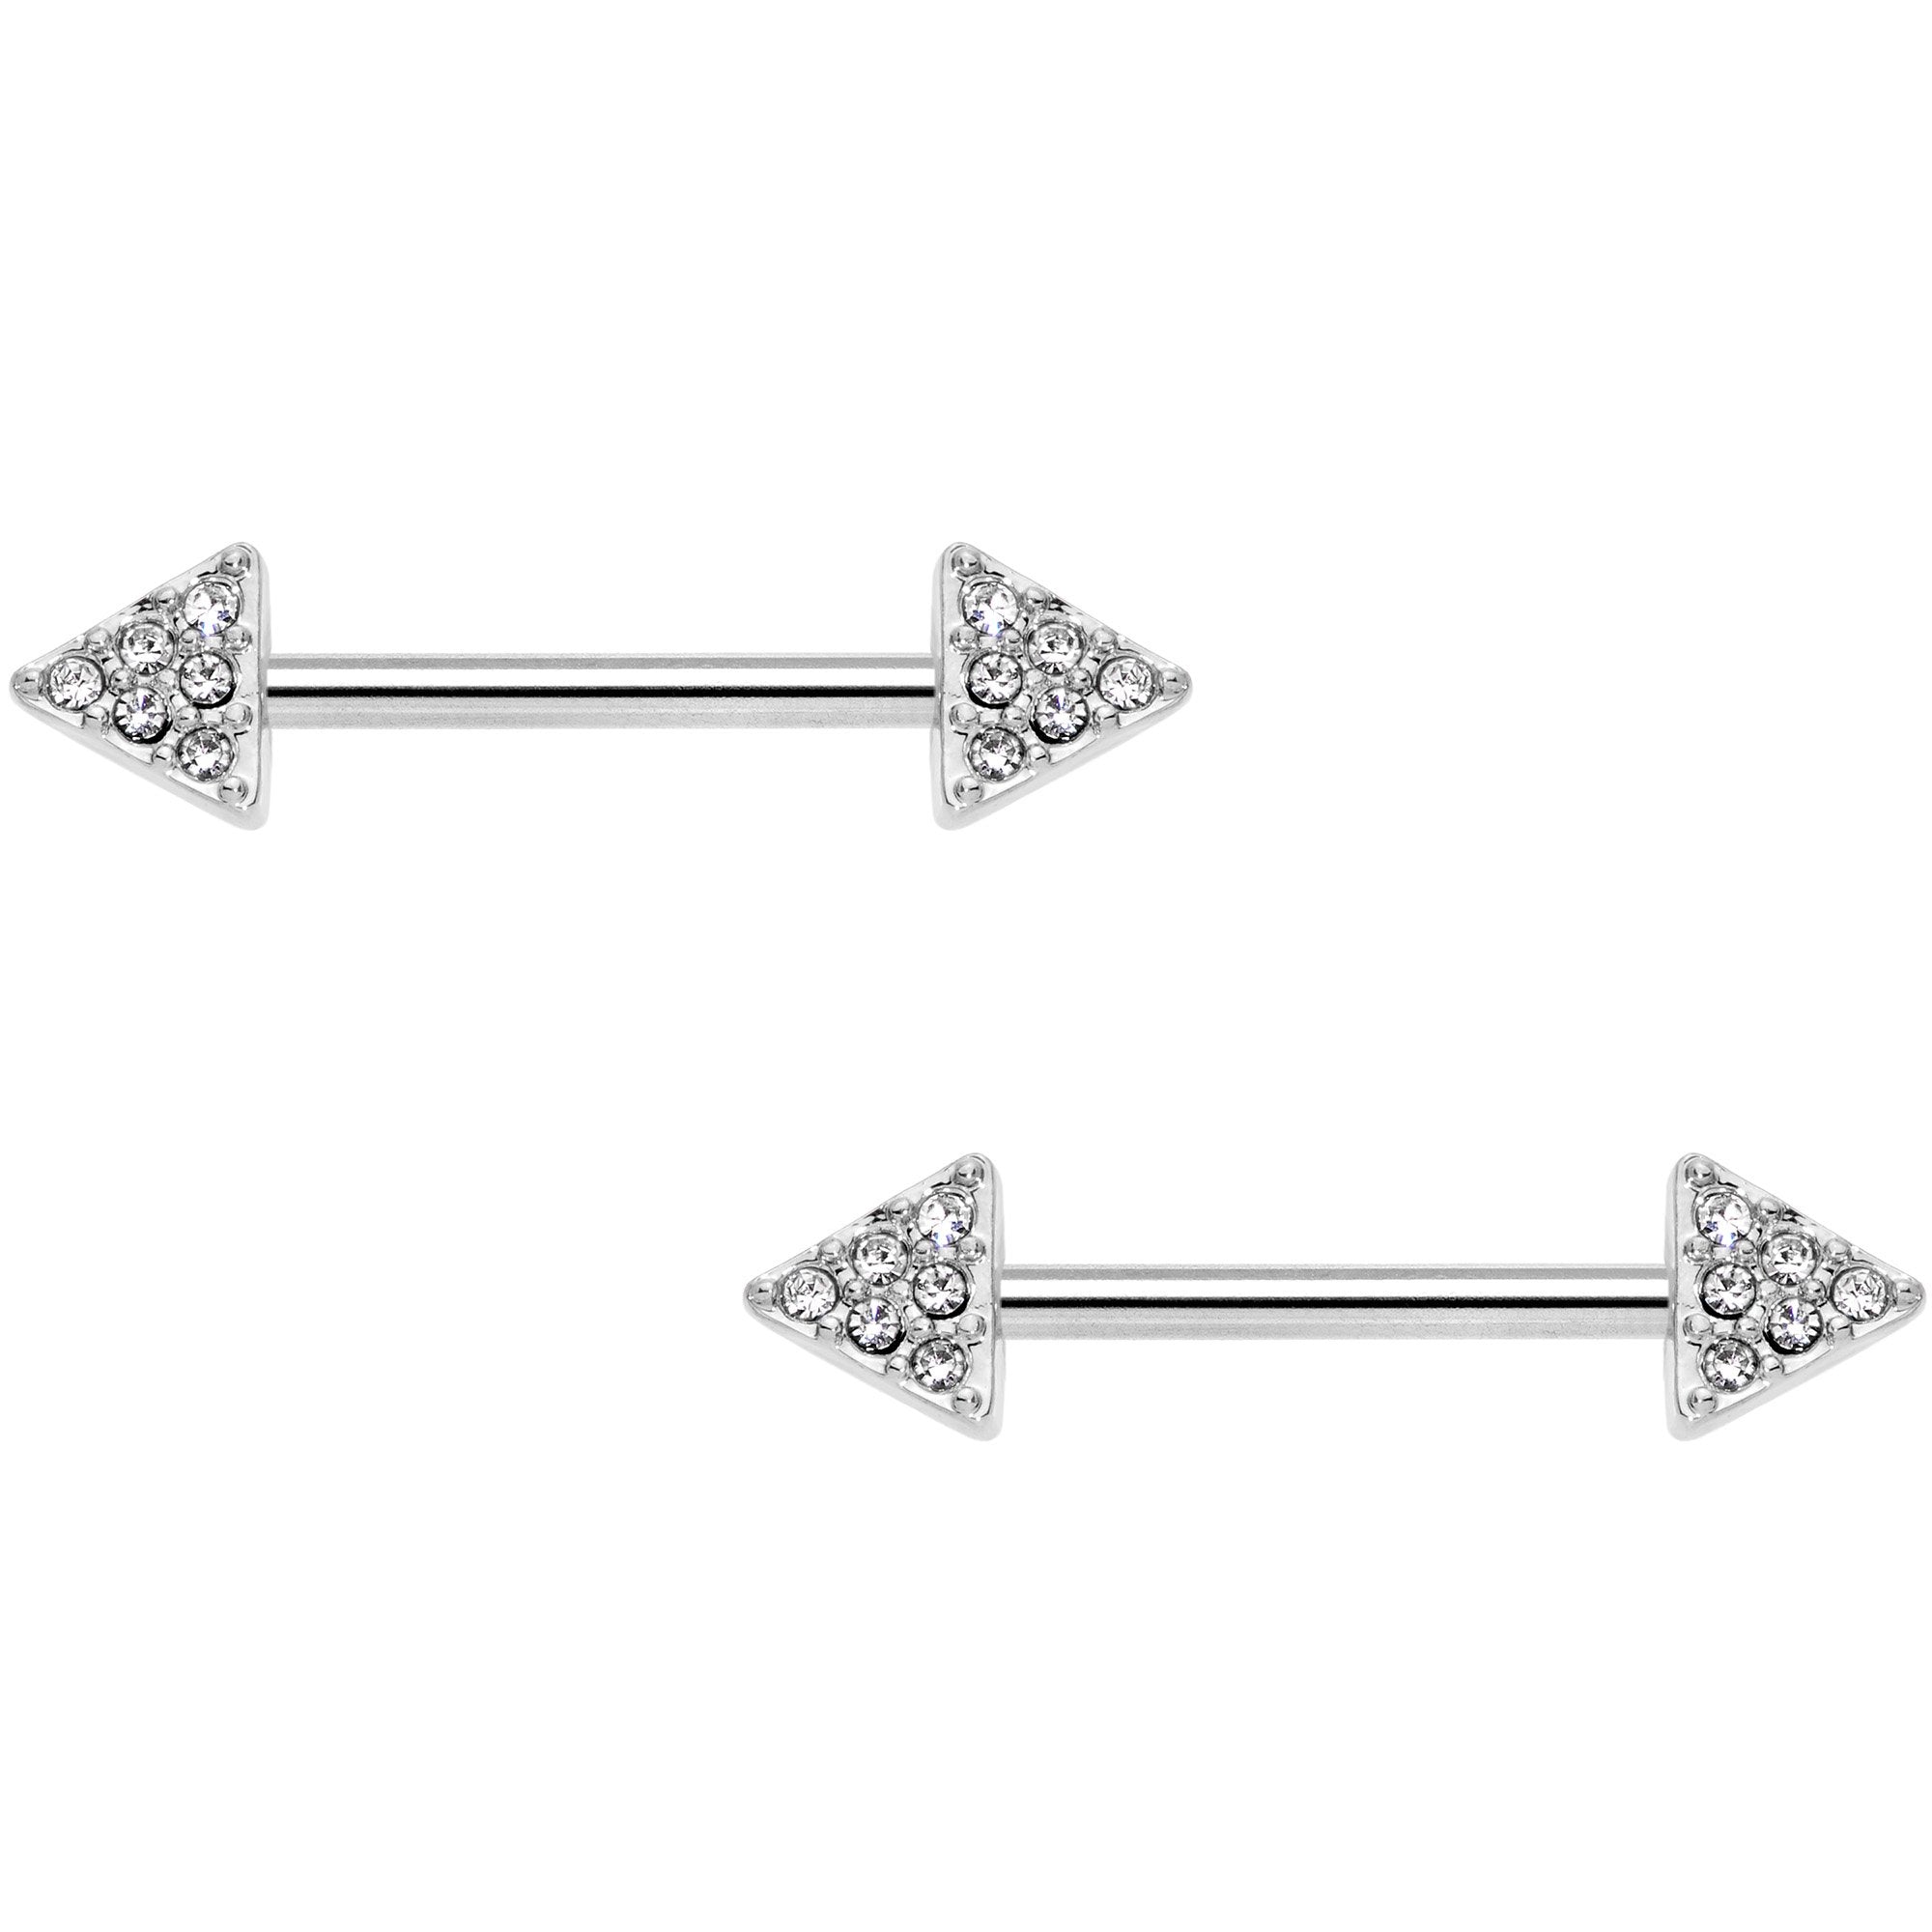 14 Gauge 9/16 Clear Gem Triangle End Barbell Nipple Ring Set of 4